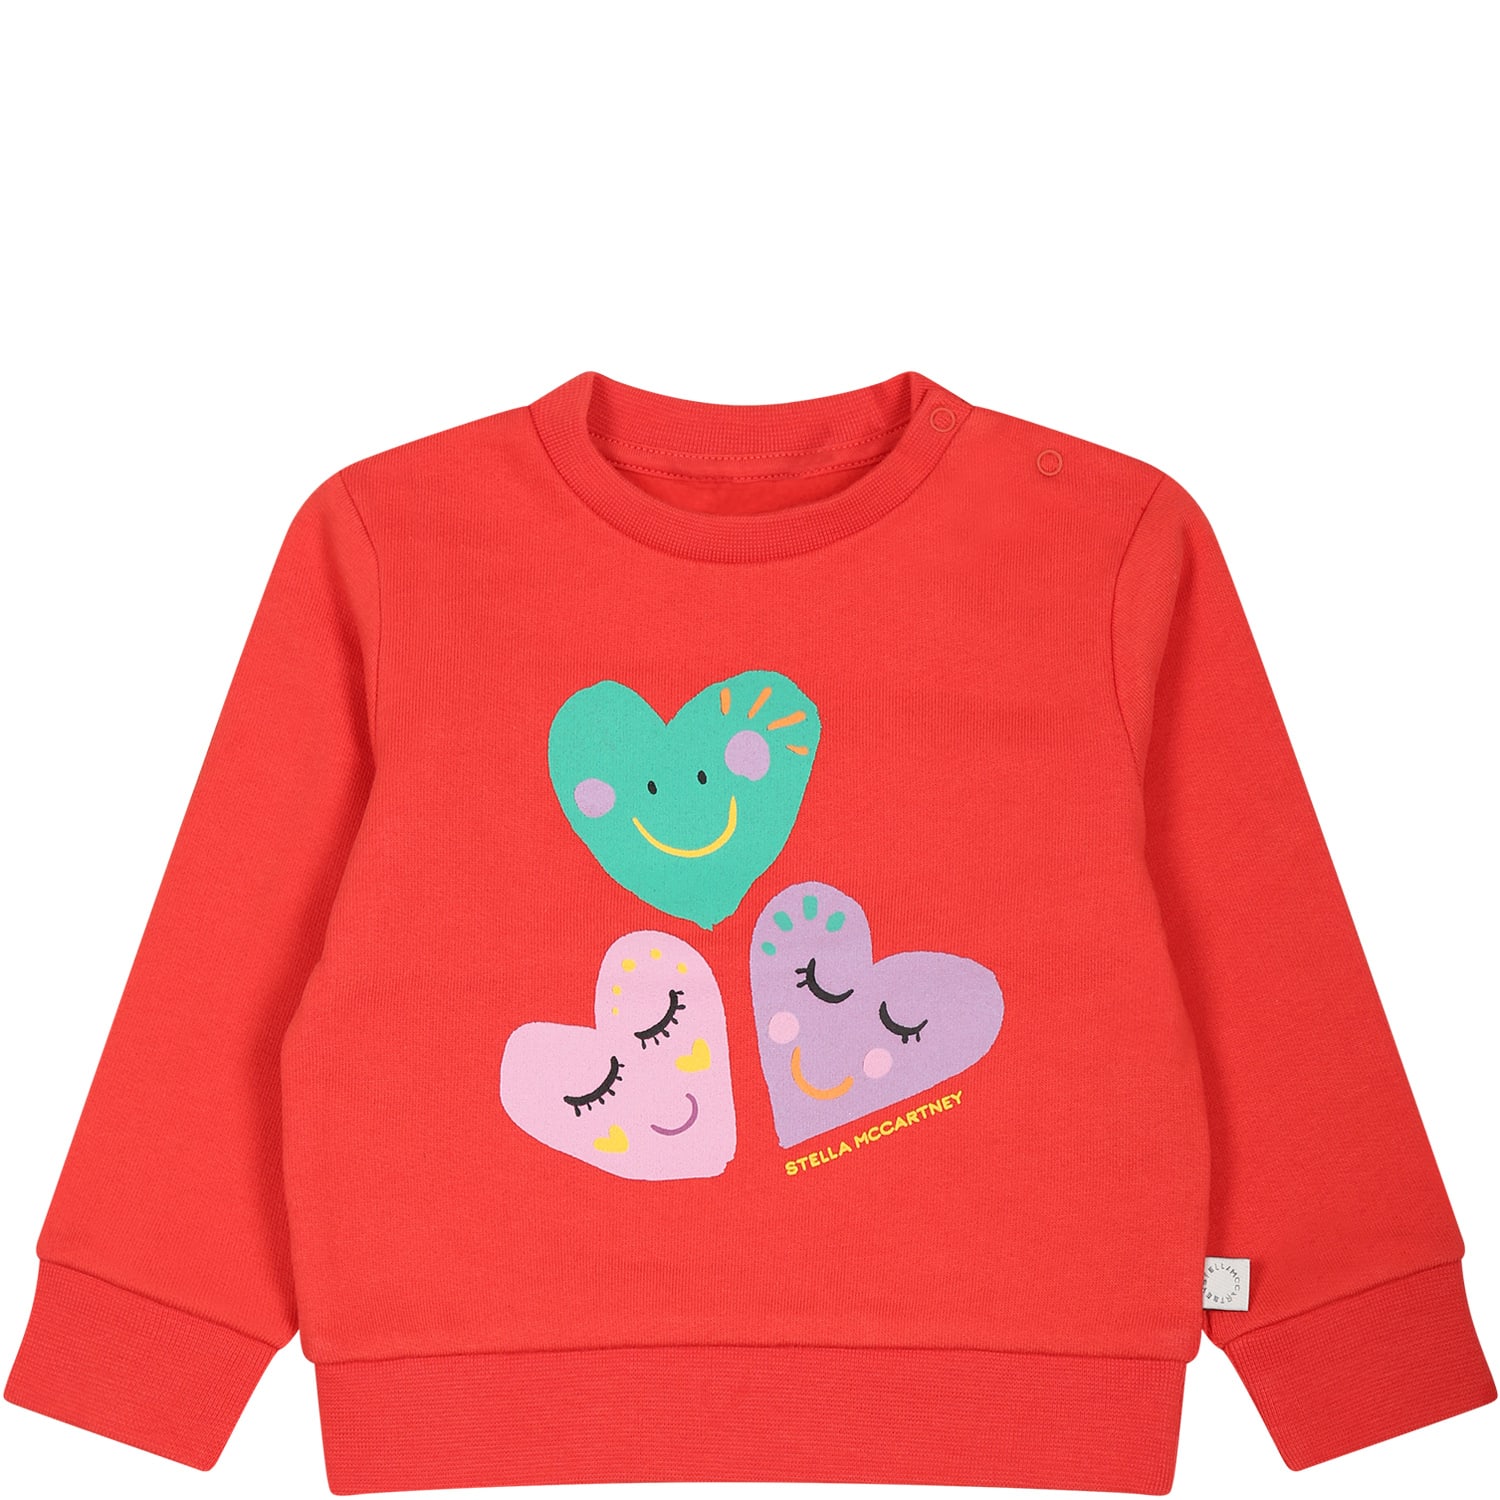 STELLA MCCARTNEY RED SWEATSHIRT FOR BABY GIRL WITH HEARTE AND LOGO